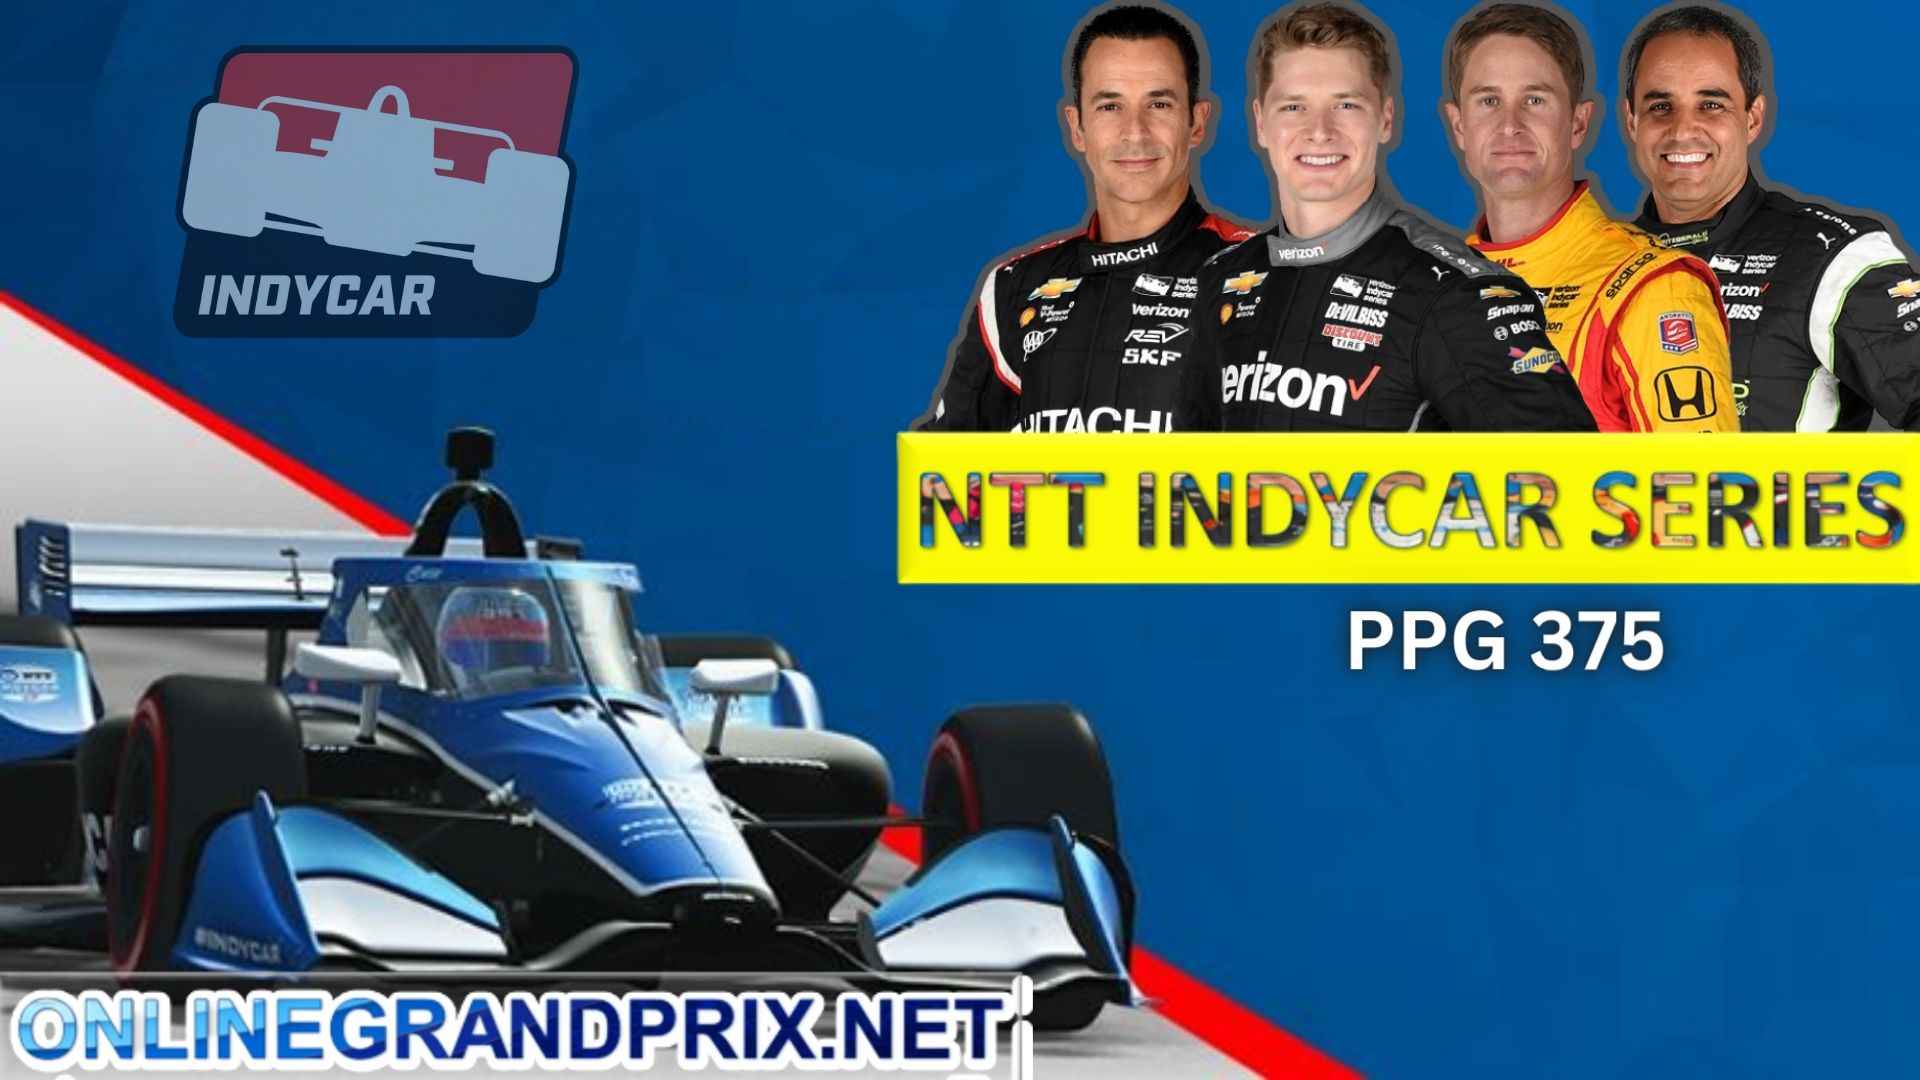 Watch XPEL 375 INDYCAR Live Streaming